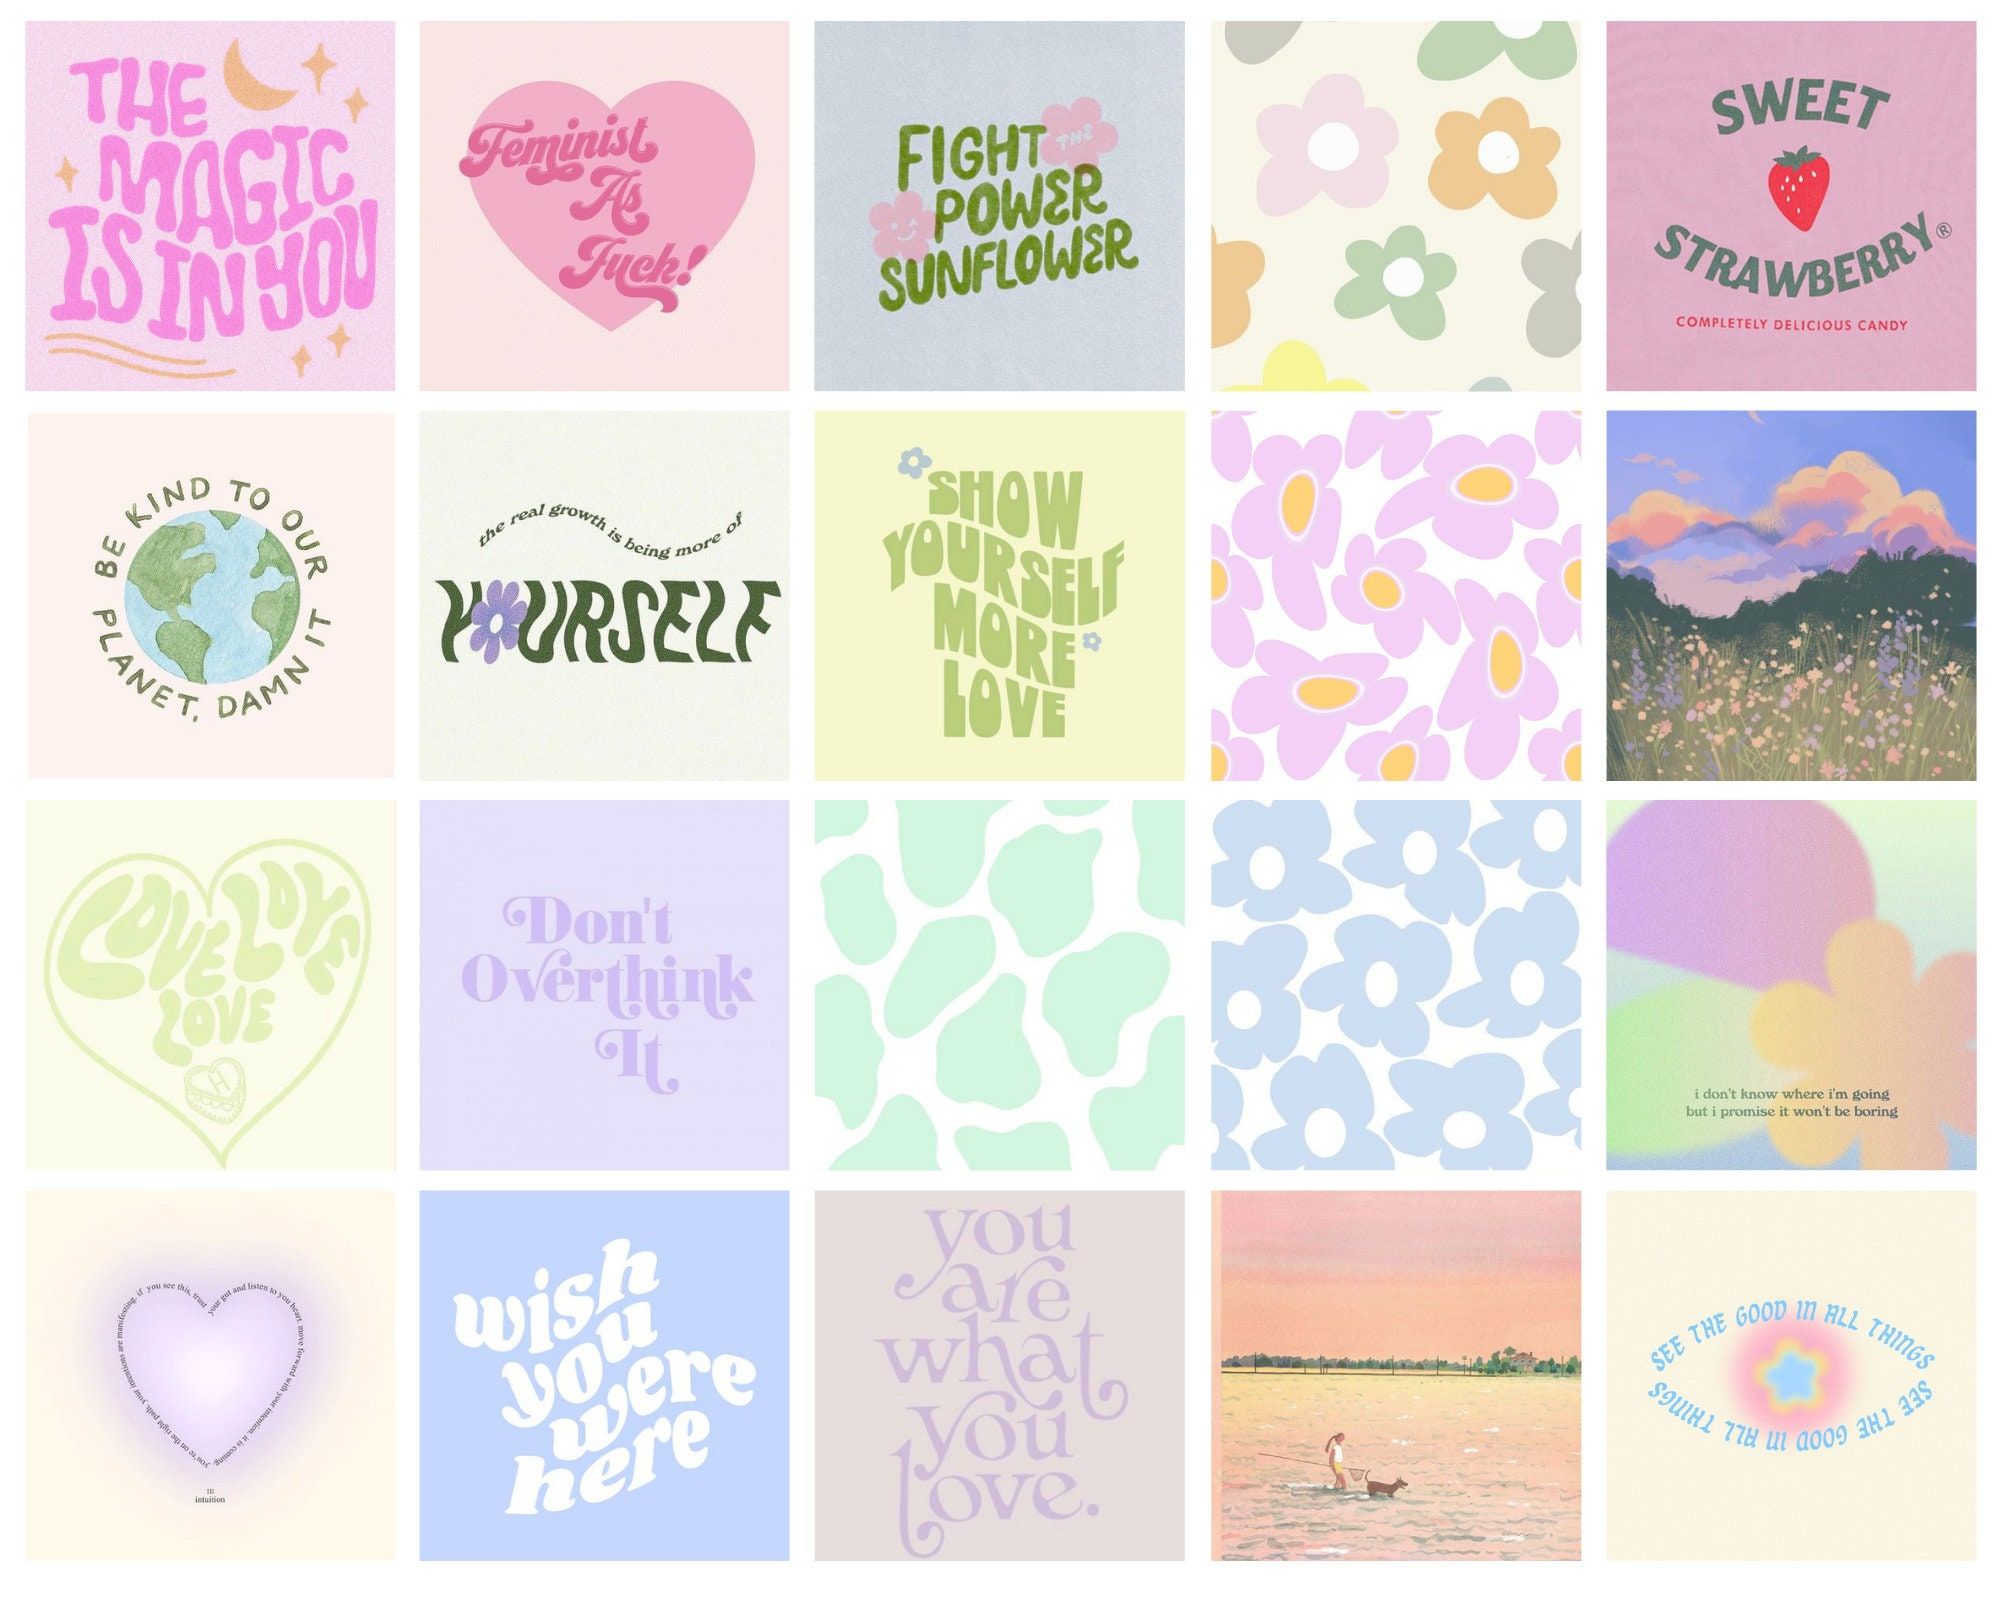 A collage of pastel colored images with positive quotes. - Danish